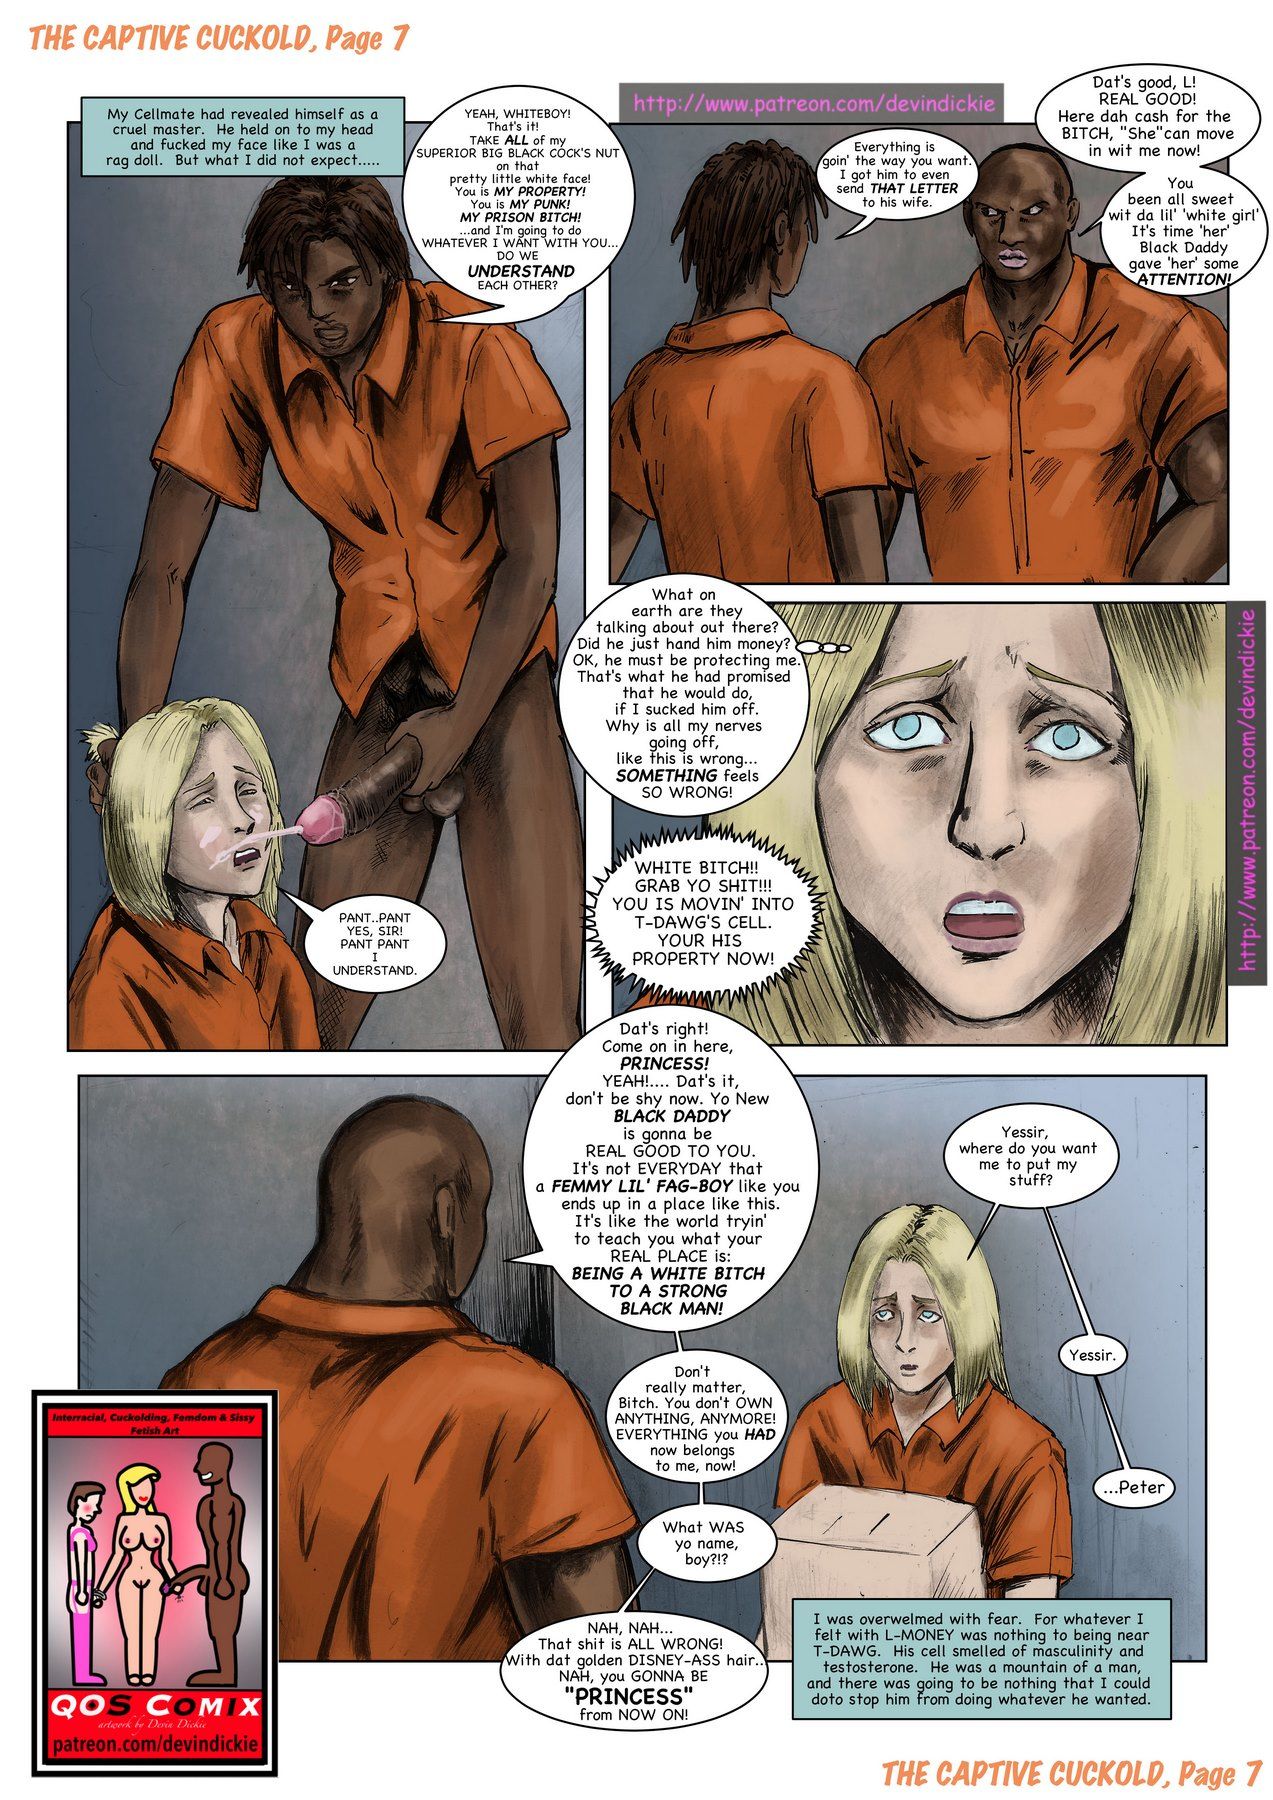 The Captive Cuckold Devin Dickie page 8